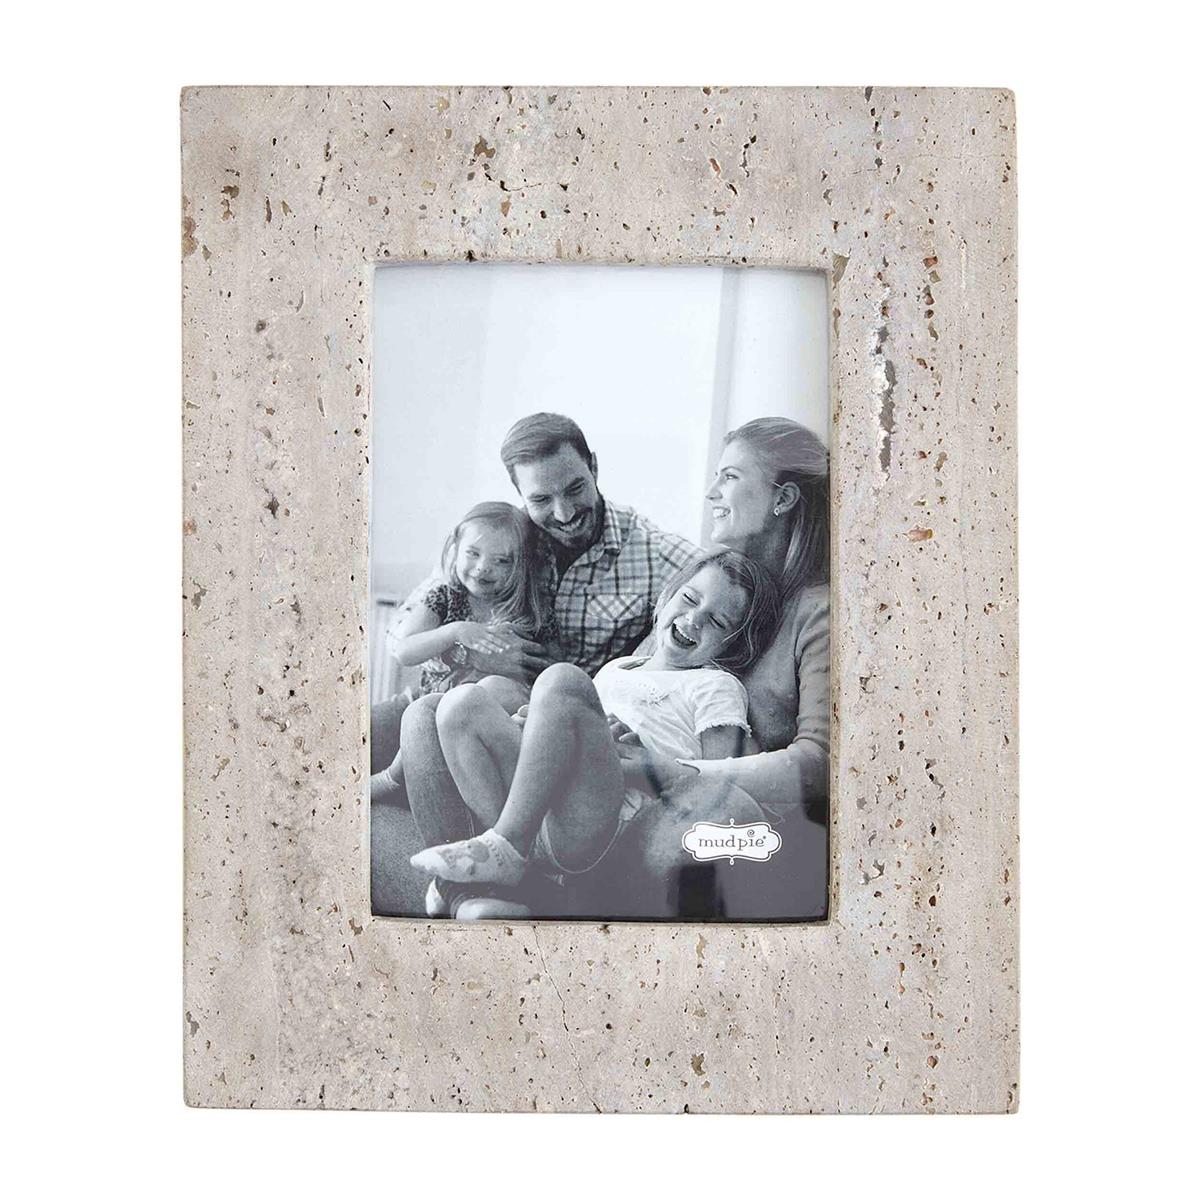 large gray travertine frame on a white background